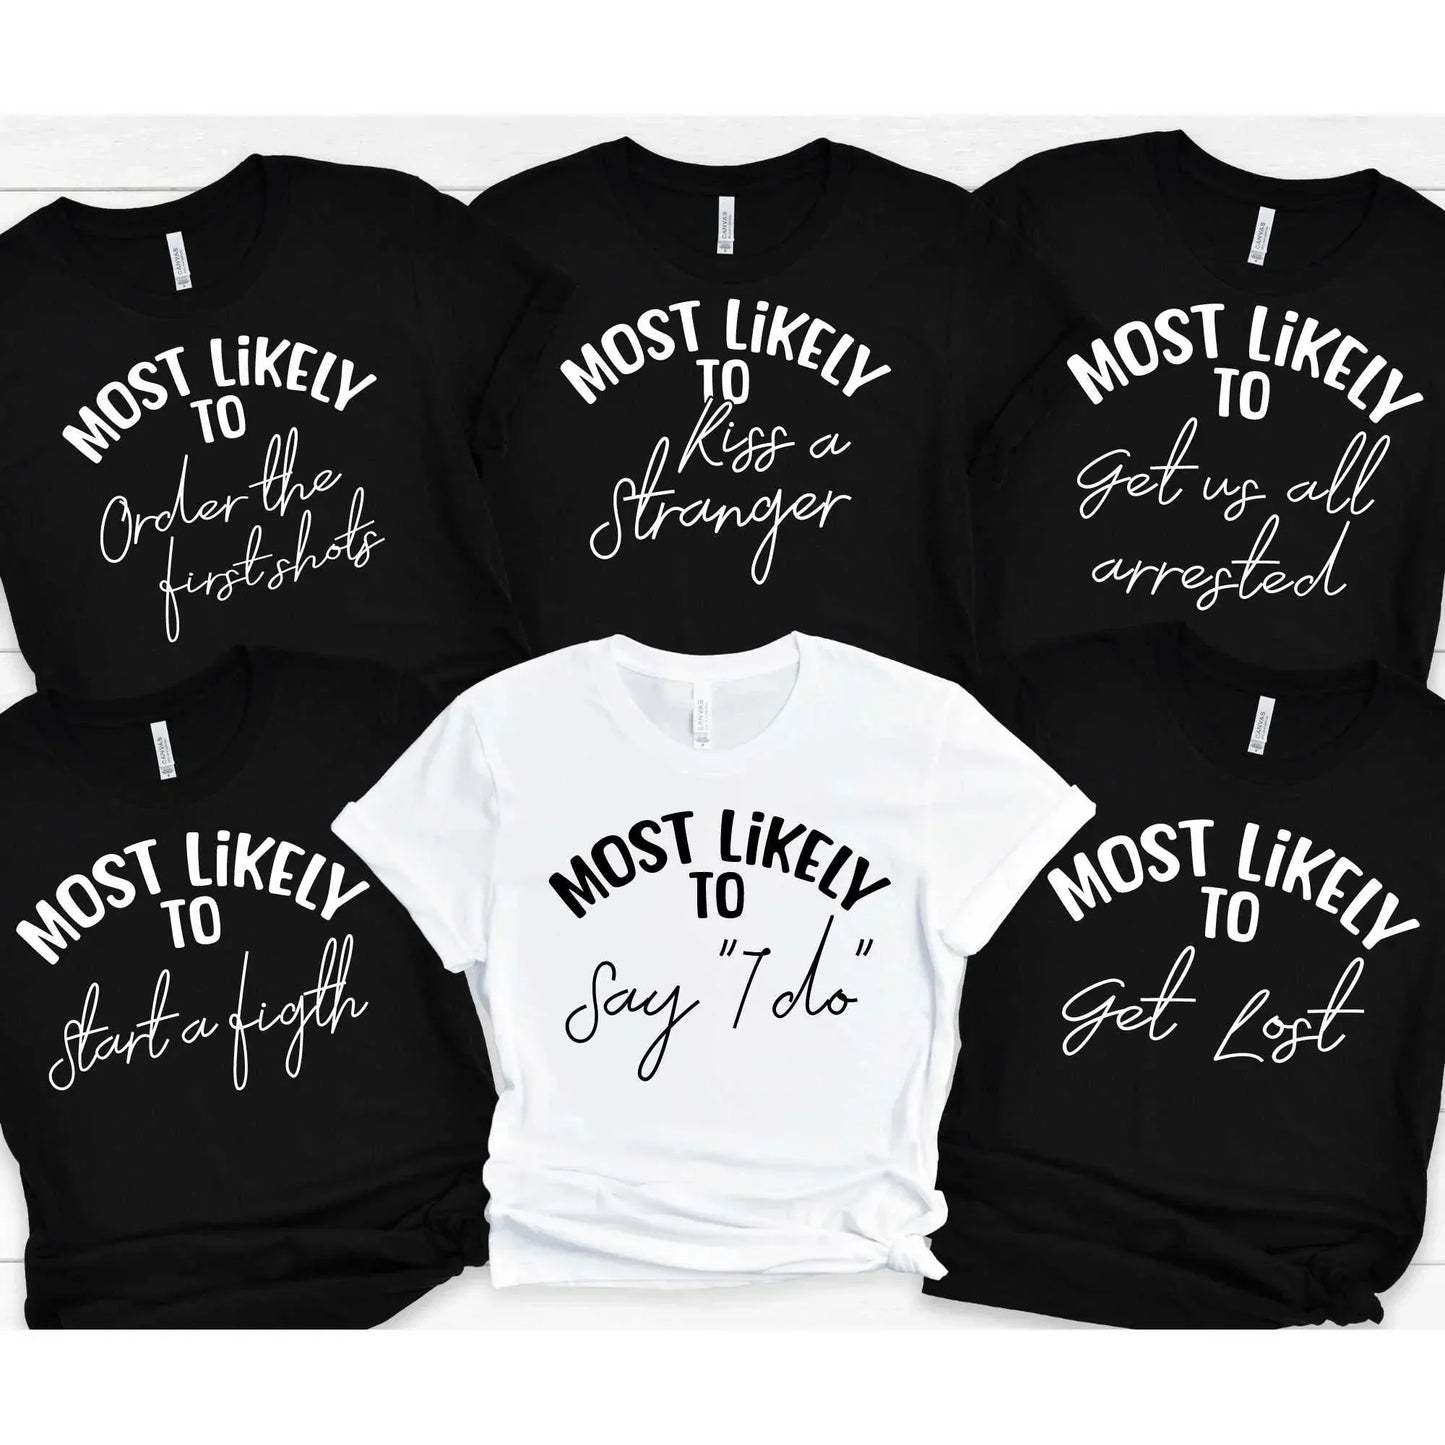 Most Likely To Shirts, Bachelorette Party Shirts, Bachelors Party Shirts HMDesignStudioUS